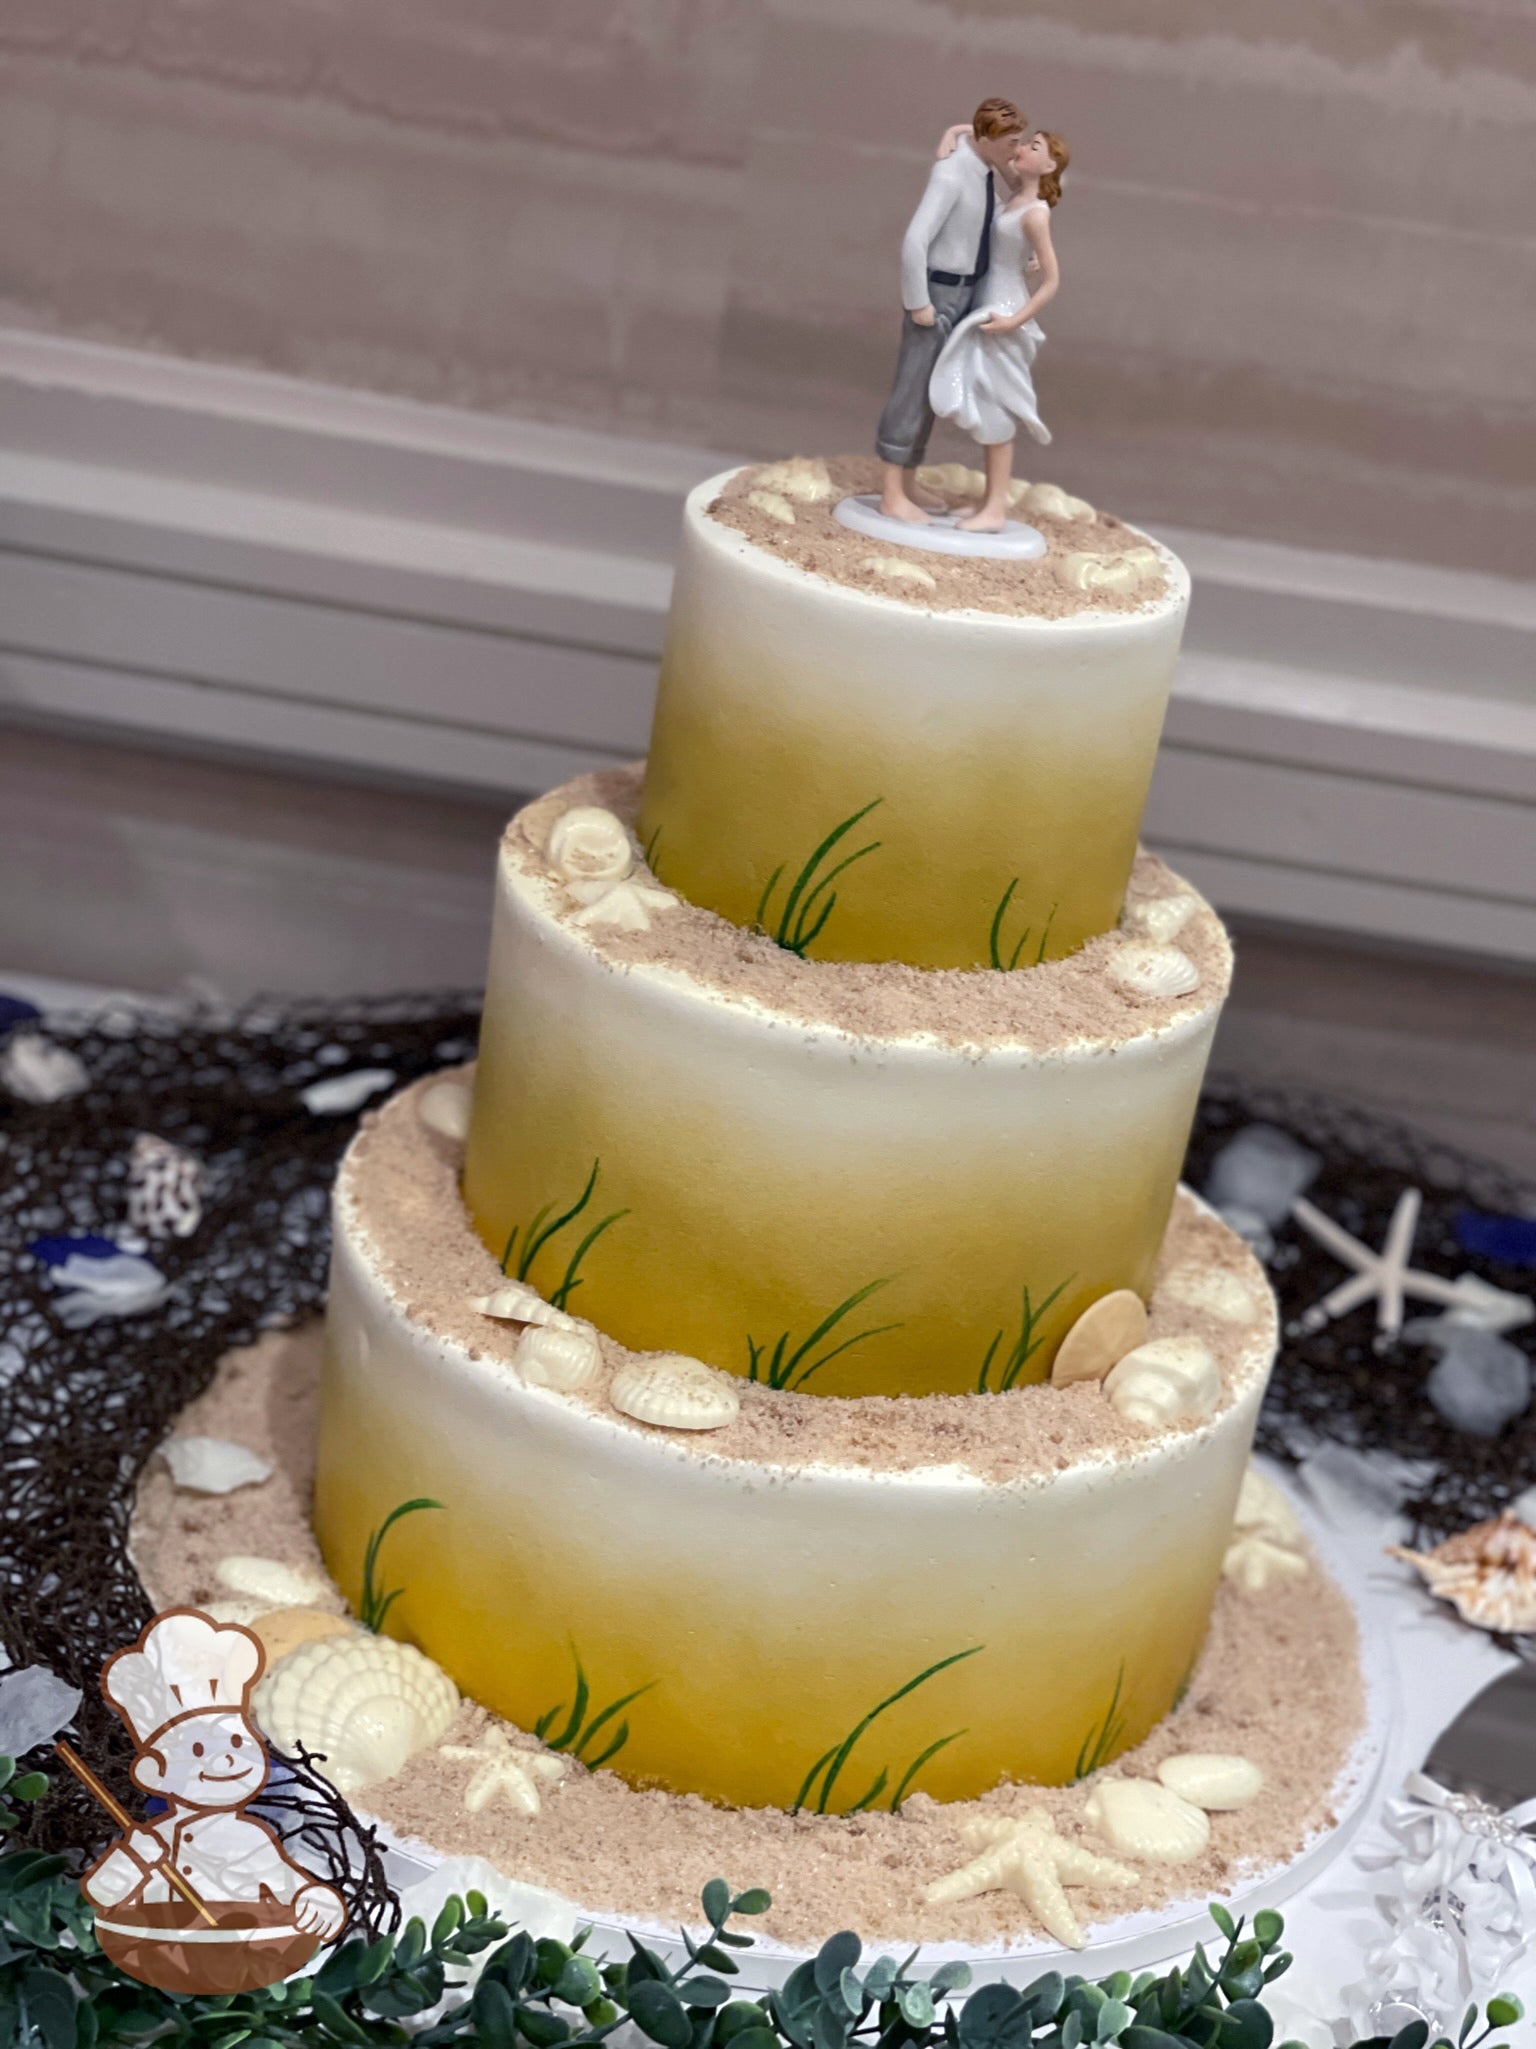 3-tier cake with brown sugar sand on top of each tier with sea shells. Cake wall are sprayed sandy brown and hand piped green blowing grass.